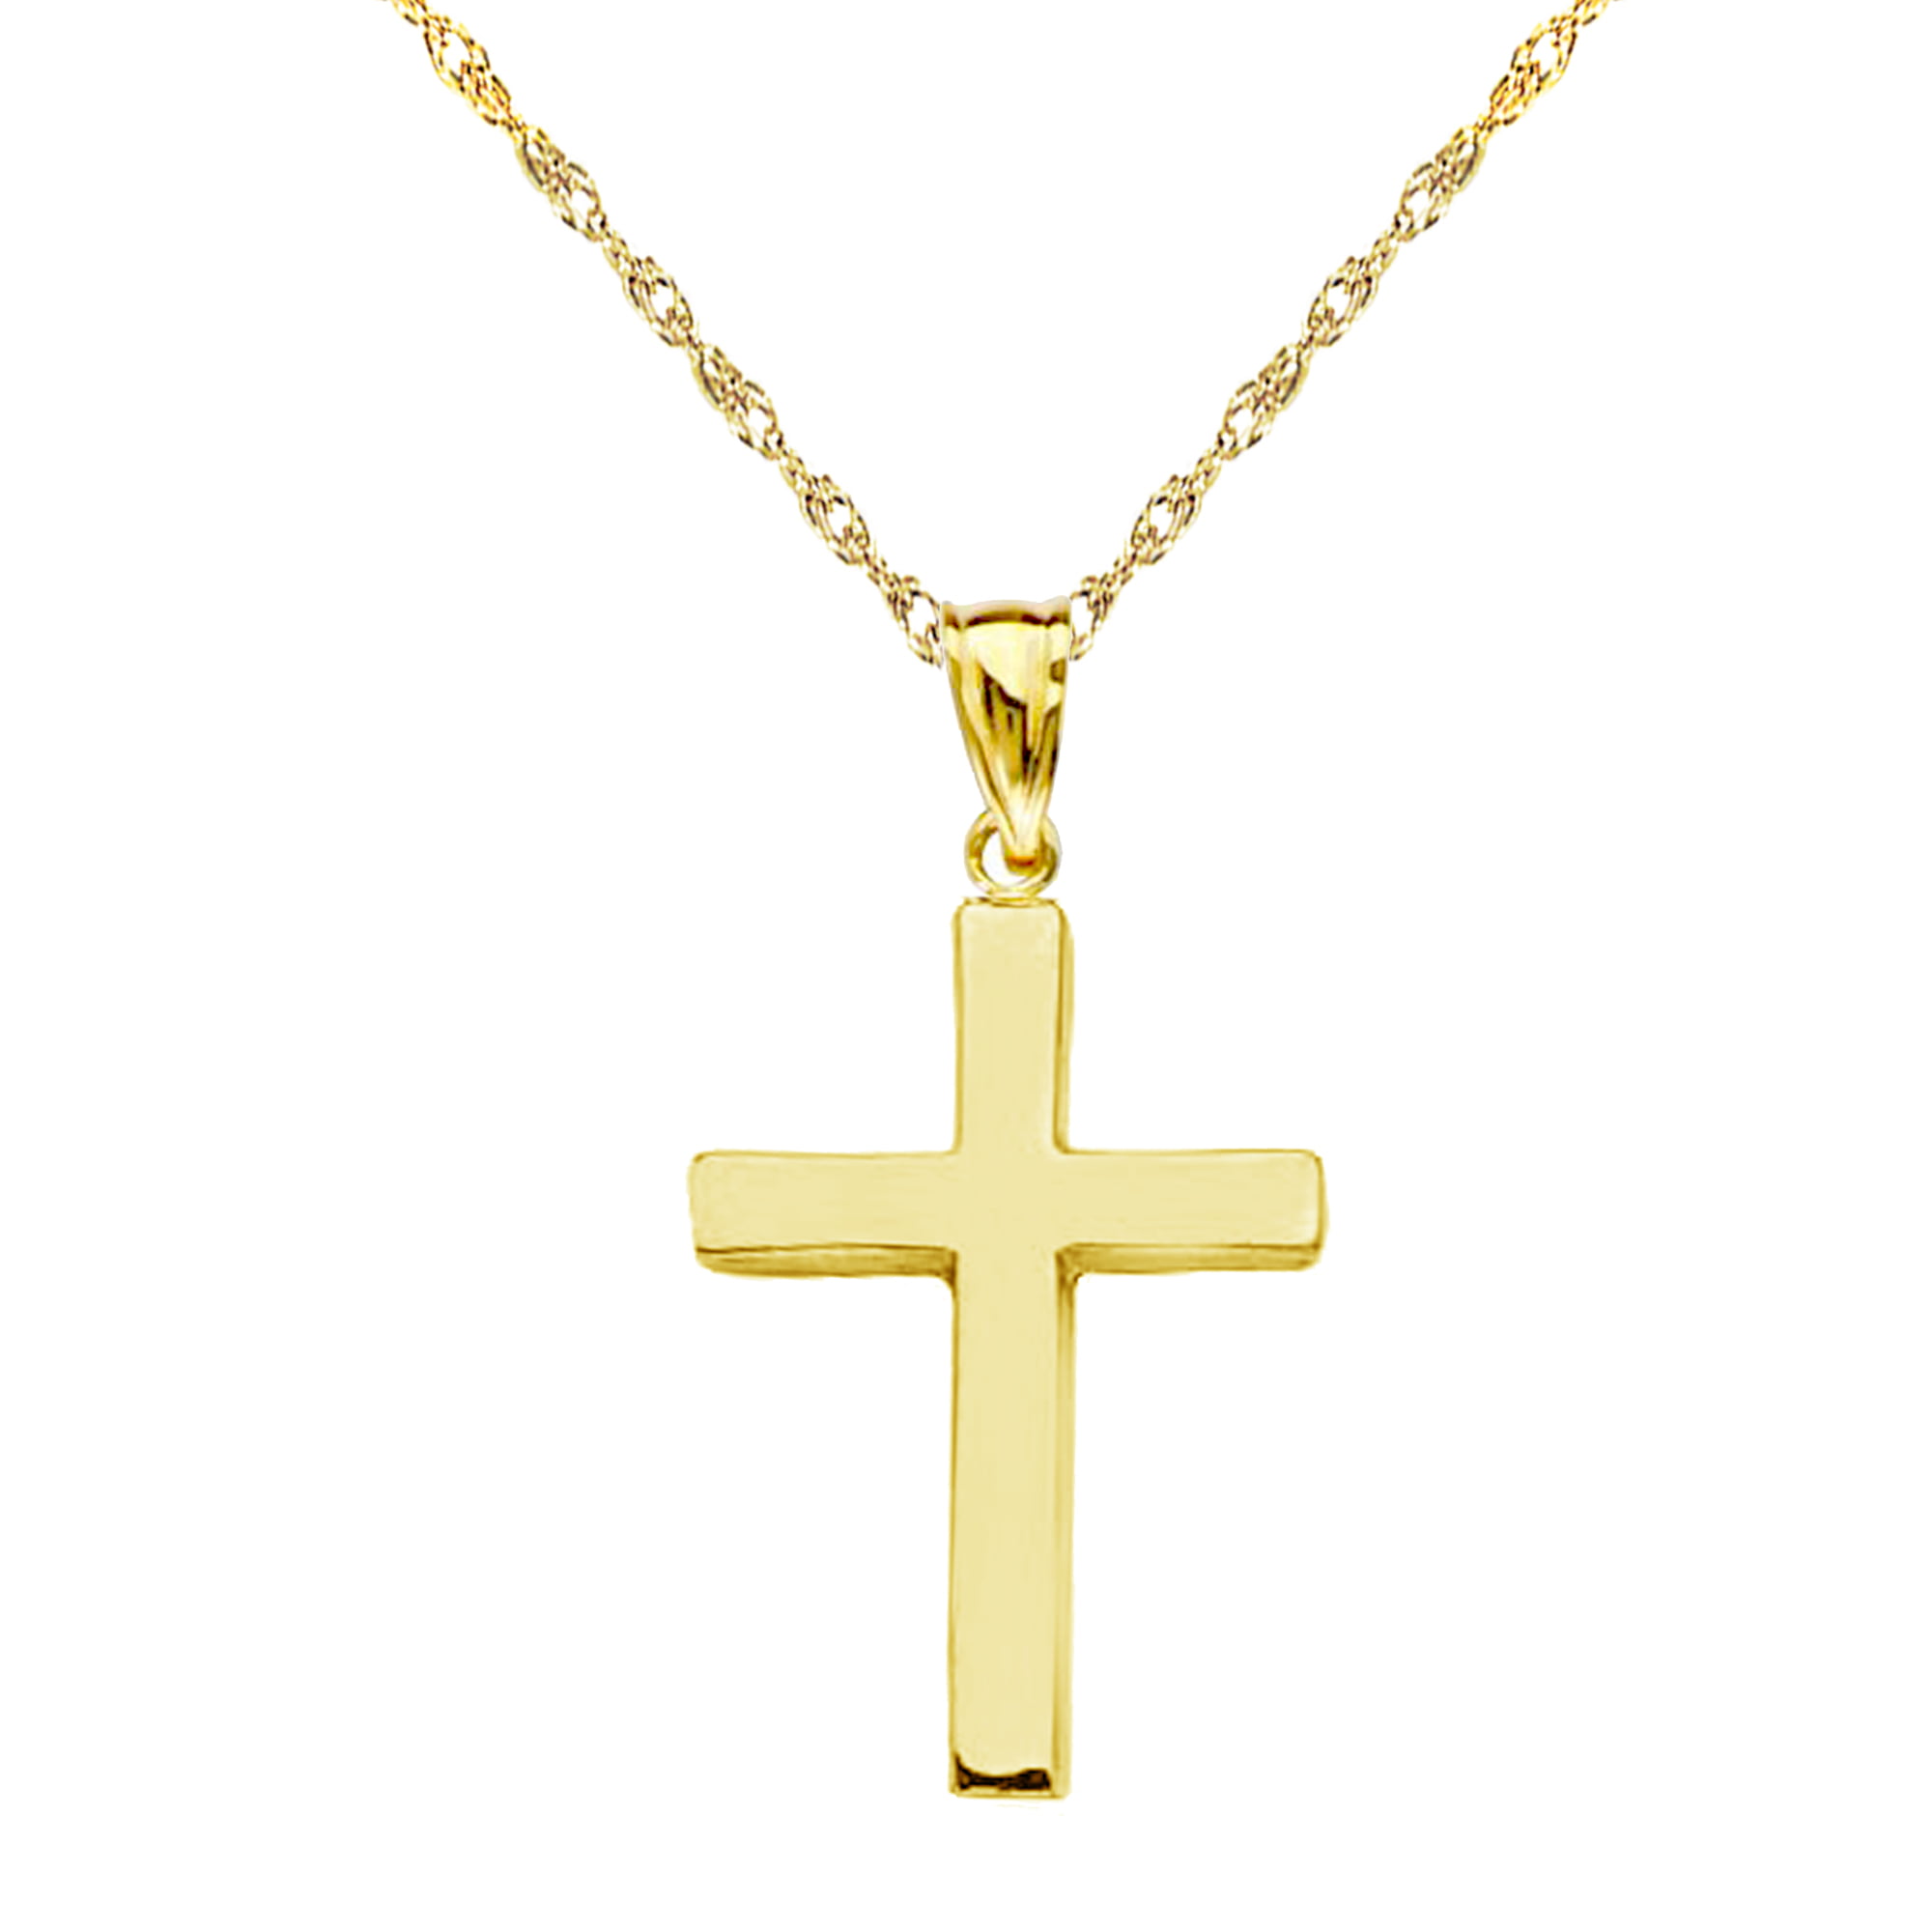 16 or 18 Inches 14k Gold Shiny Tubular Baby Cross Charm Pendant Necklace 